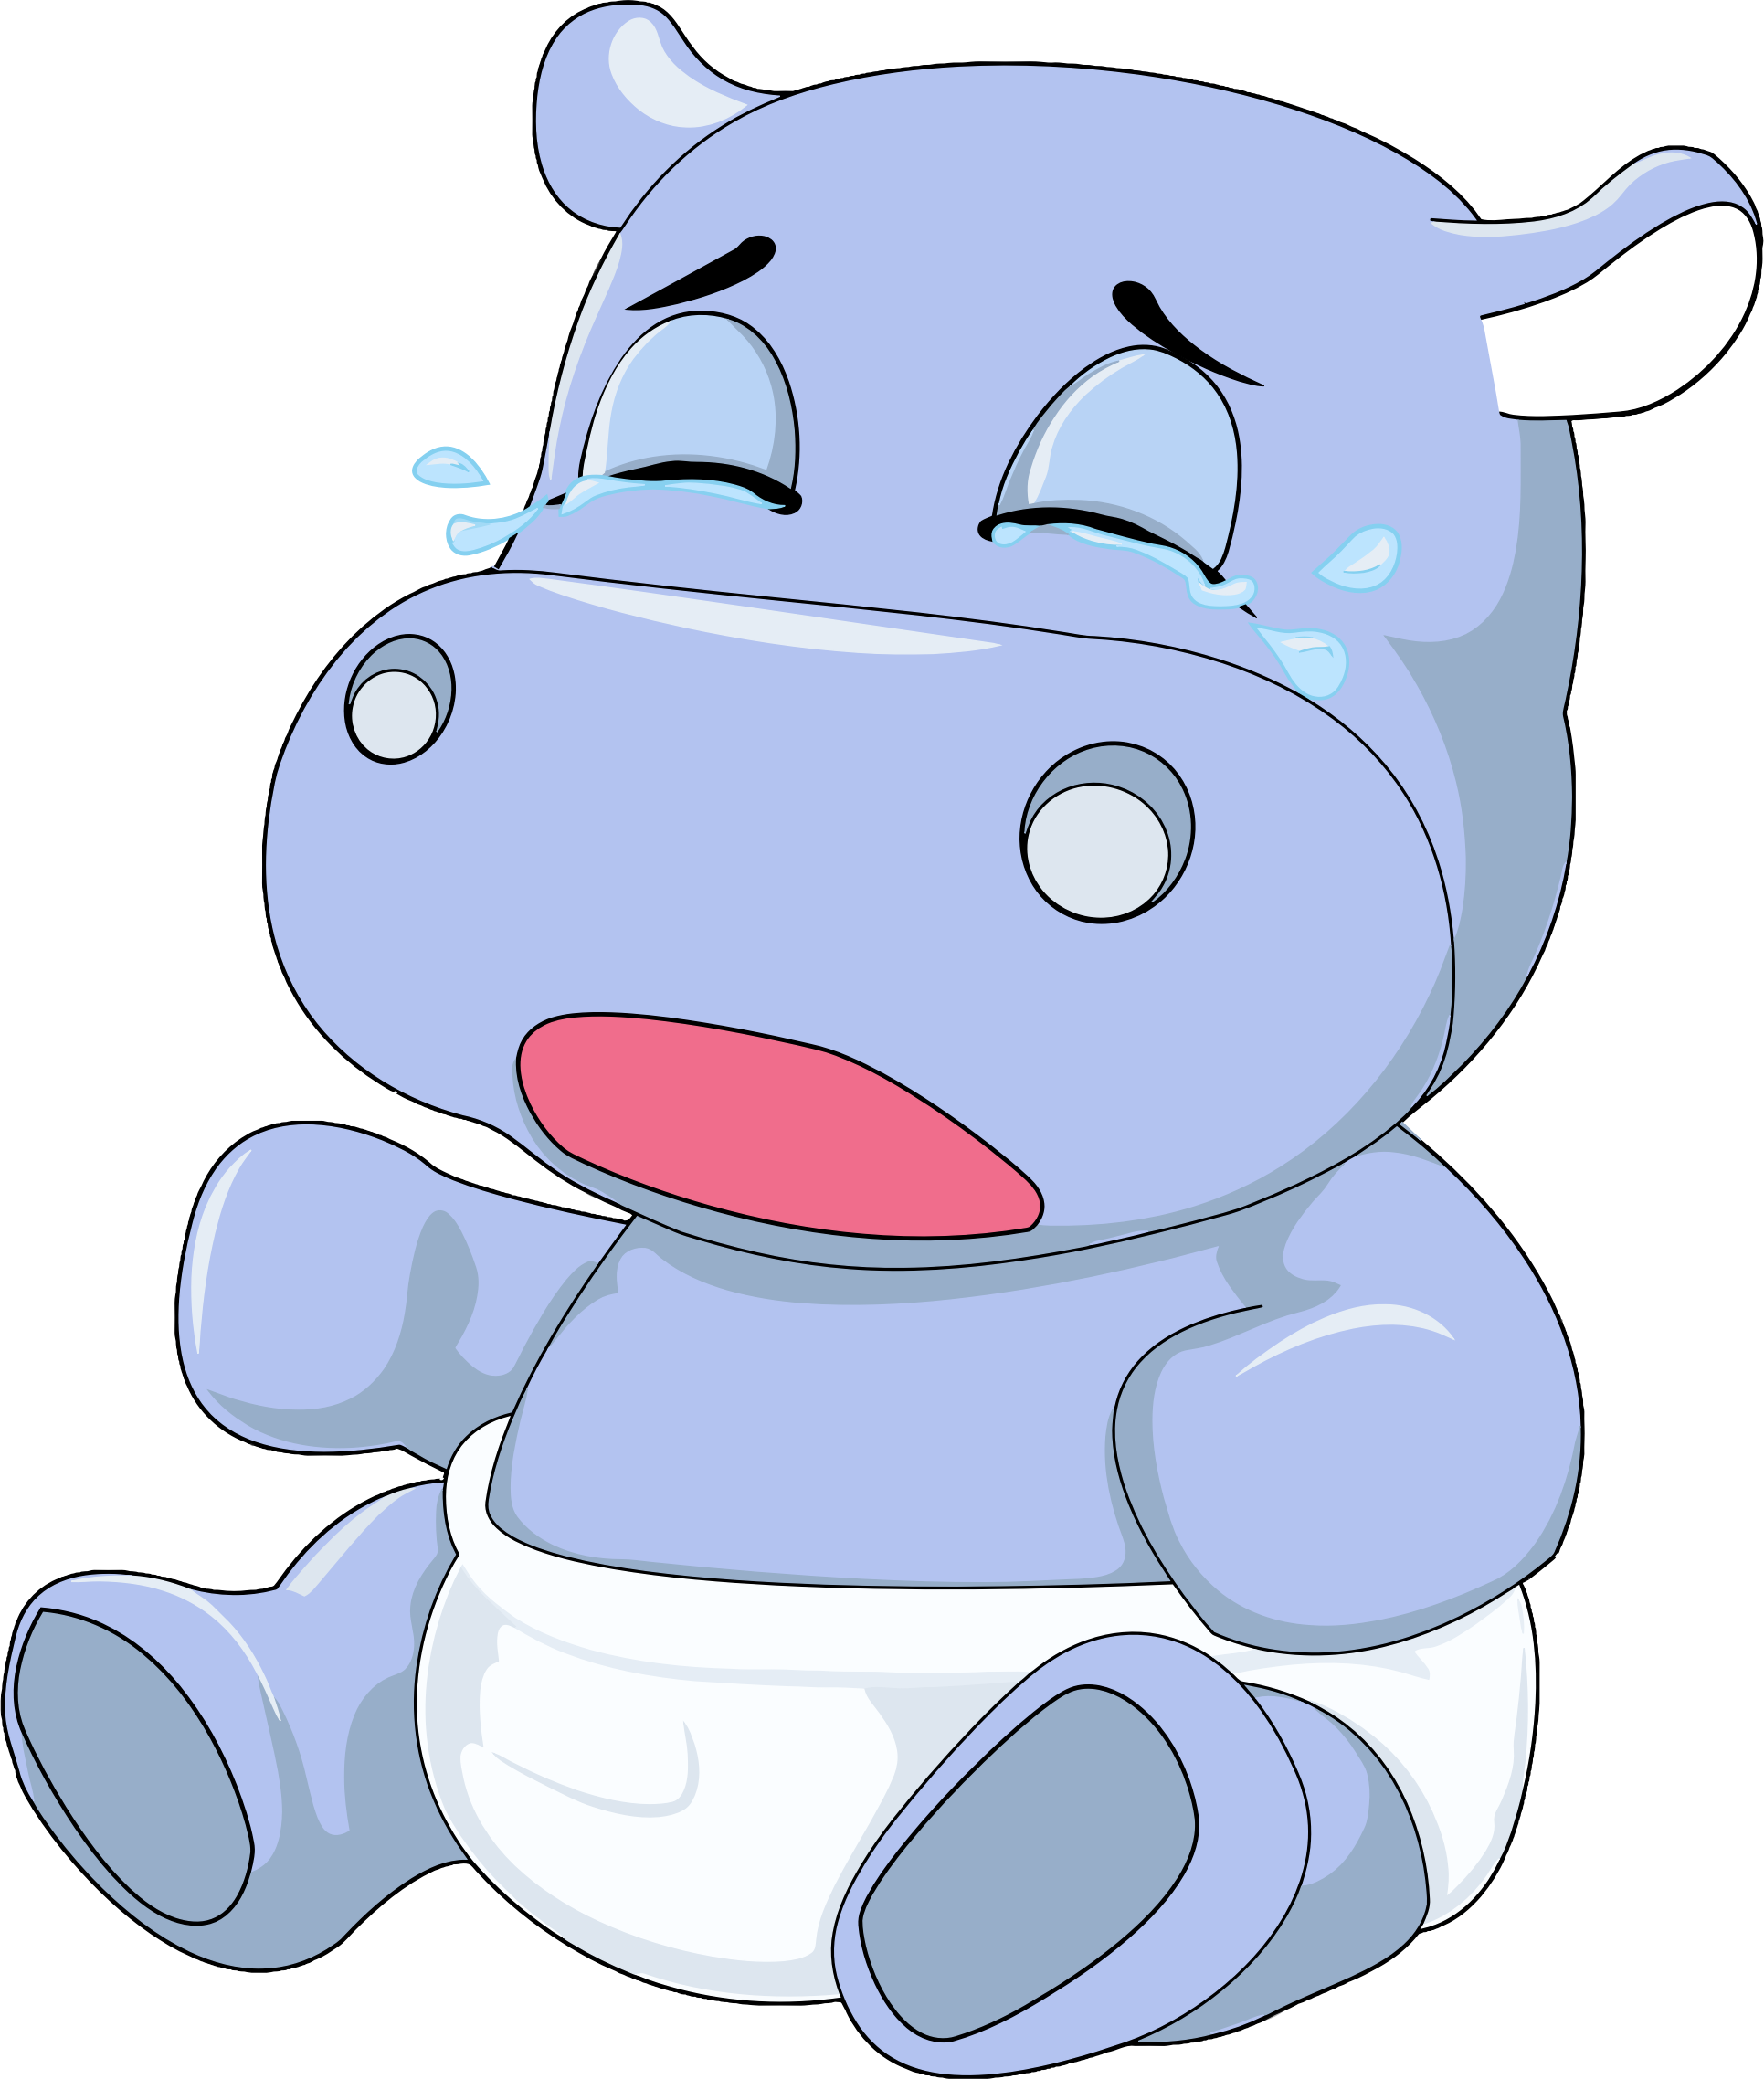 Cry clipart baby cry. Hippo crying big image